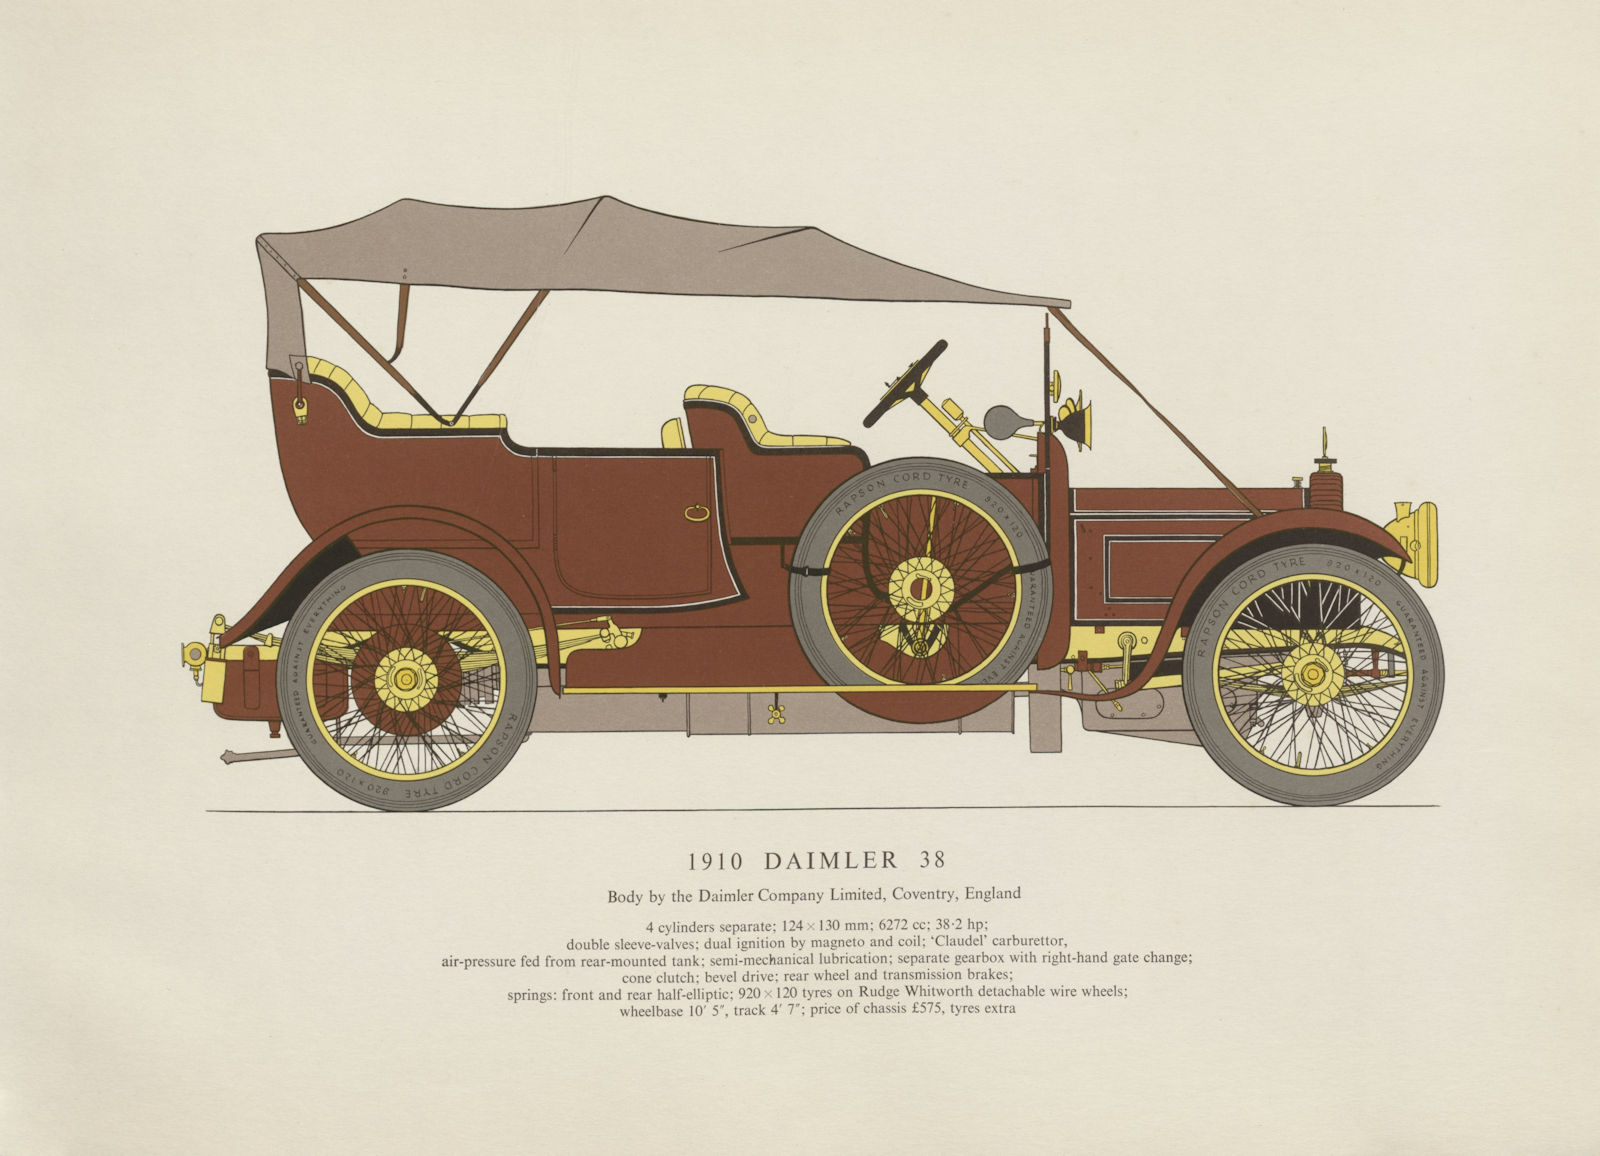 Associate Product Daimler 38 touring car (1910) motor car print by George Oliver. Coventry 1959